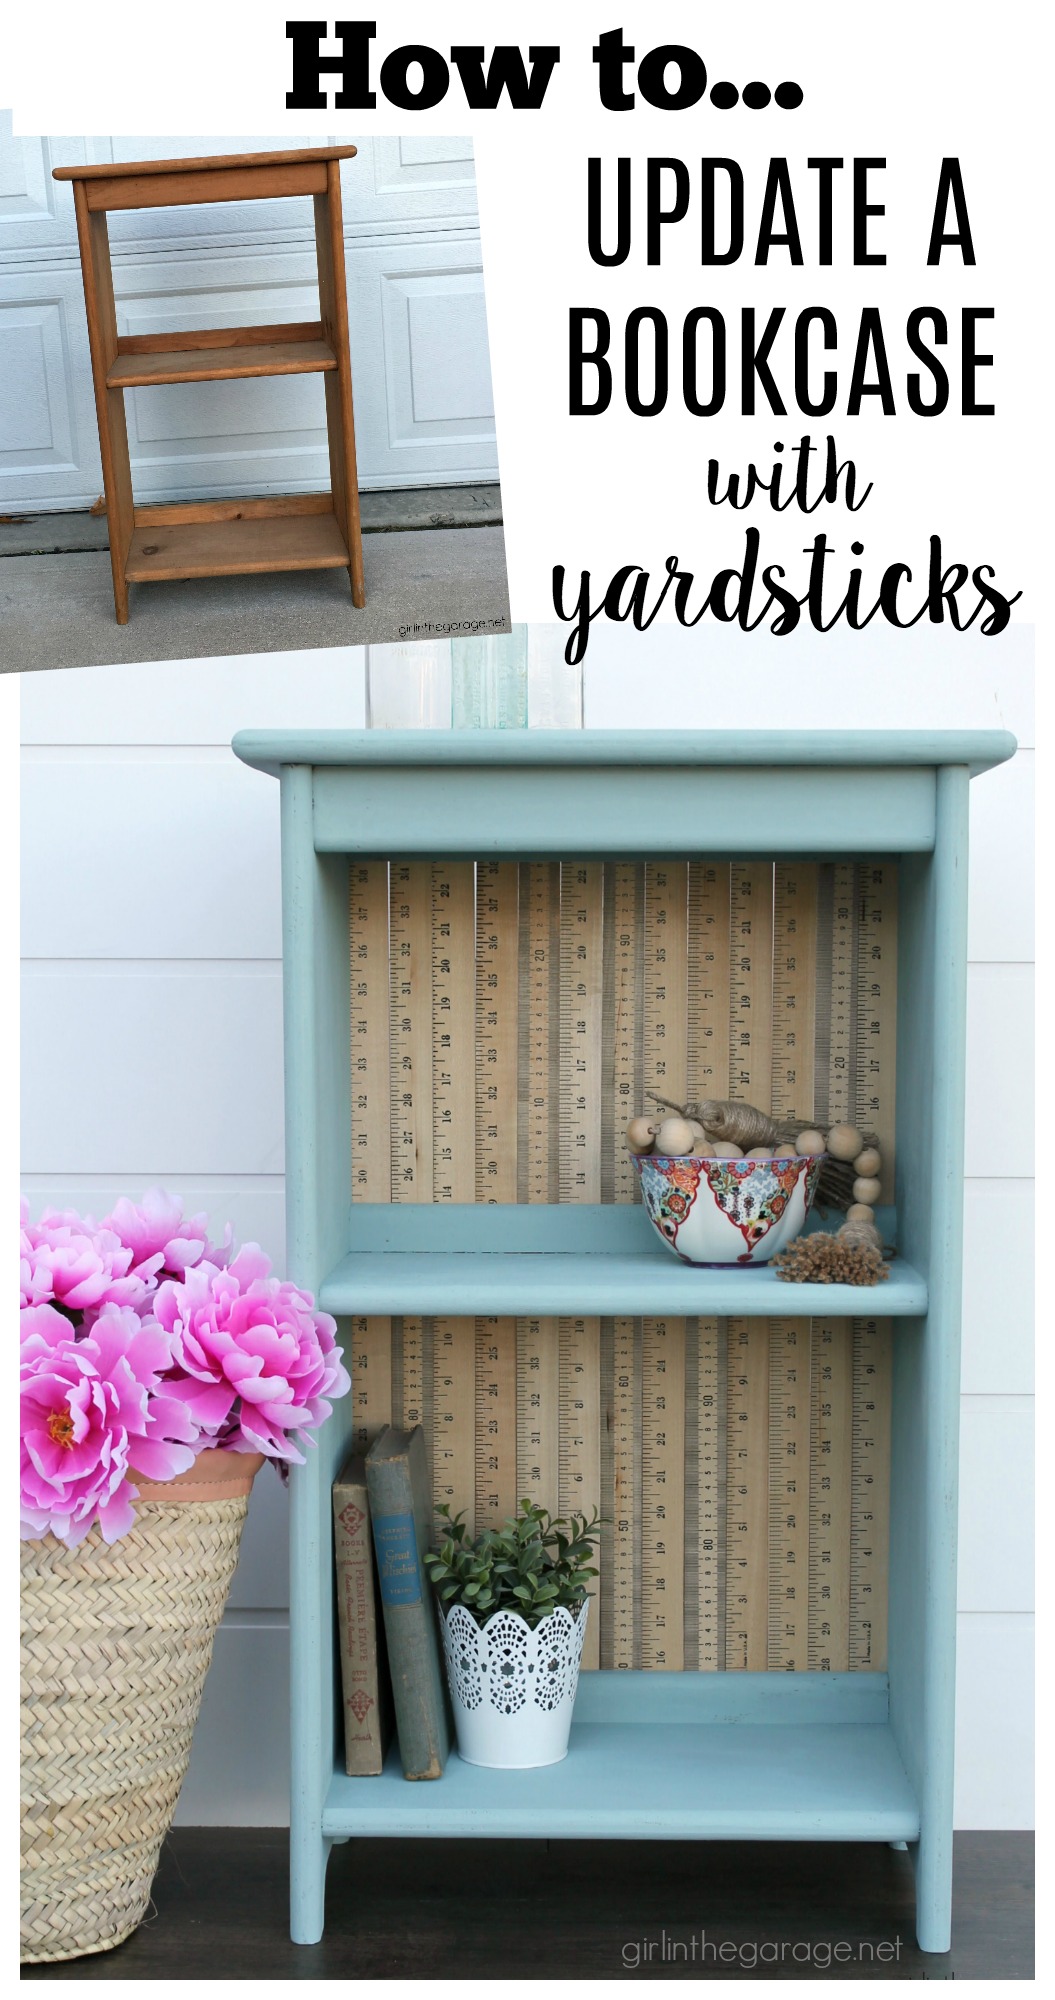 Most Popular DIY Projects of the Year - DIY furniture makeover and decor ideas by Girl in the Garage